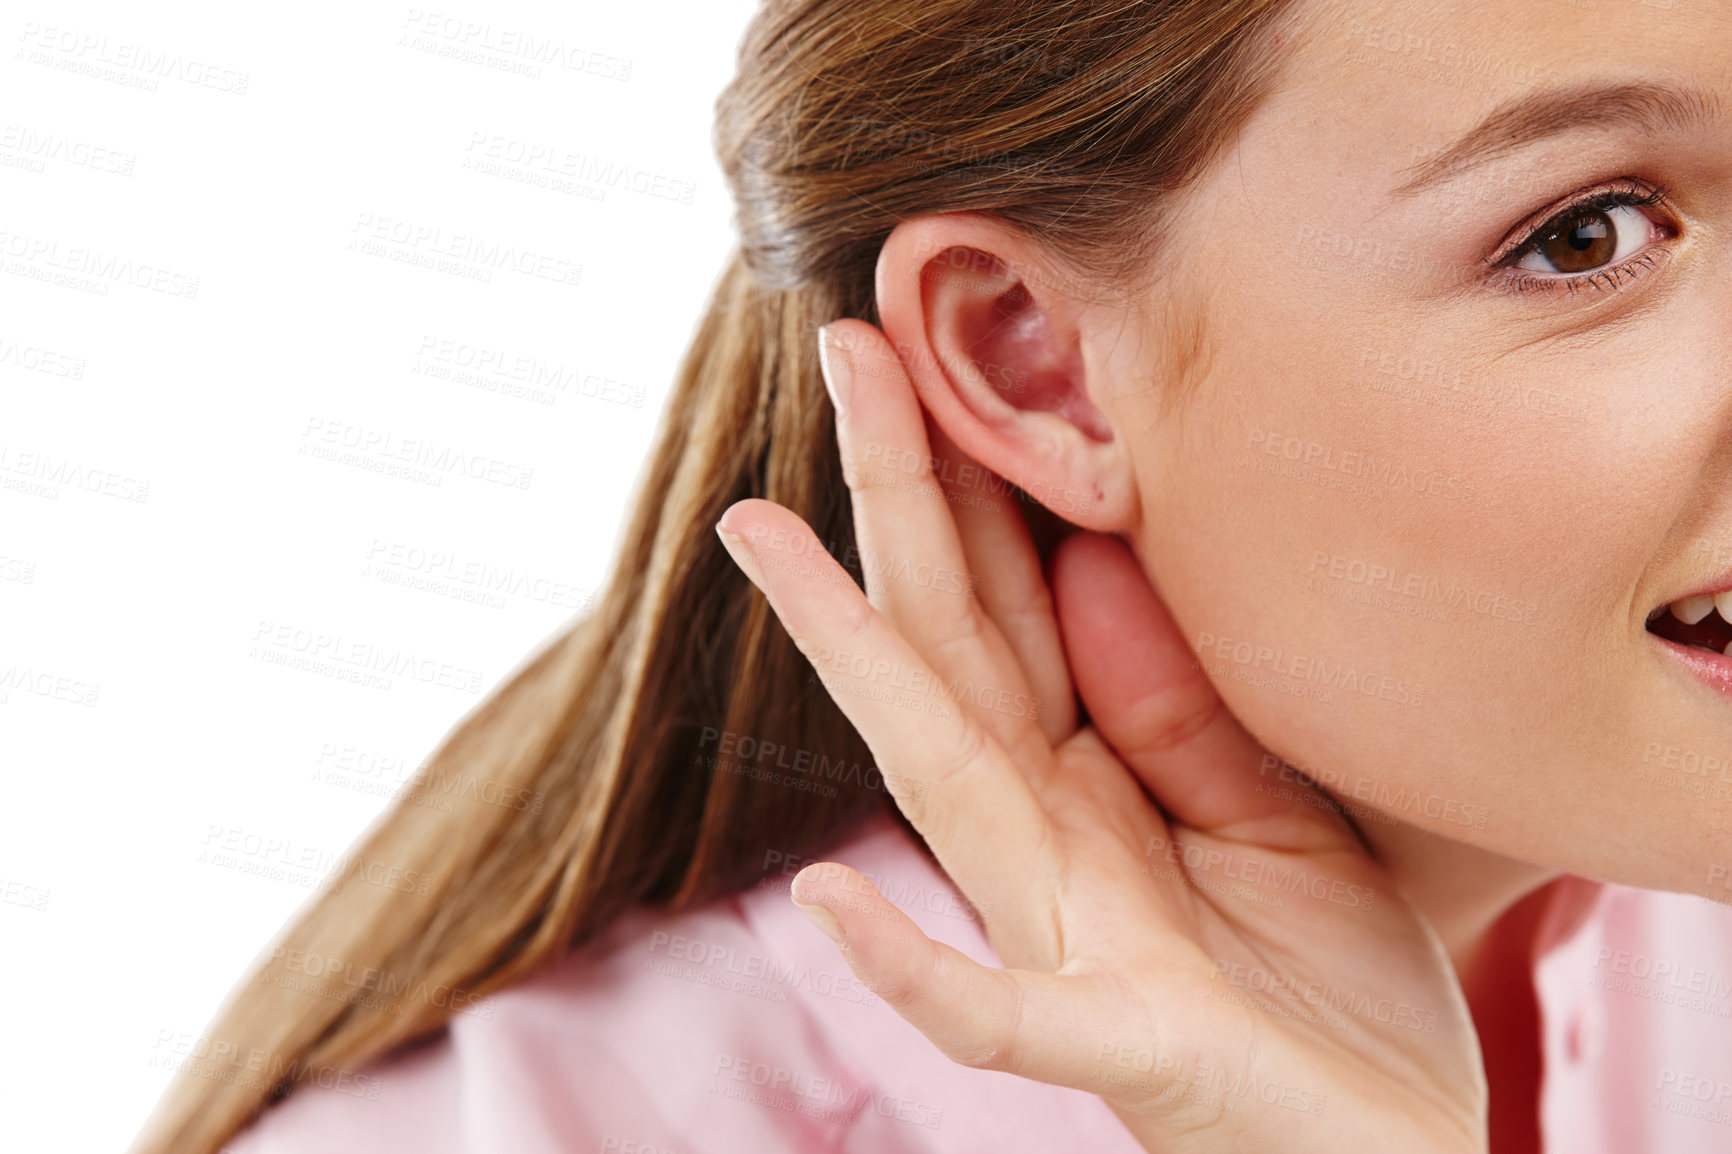 Buy stock photo Woman, ear and listening to gossip, rumour and gesture as spy to hear serious whispers in secret. Curious, female person and palm trying to concentrate on interesting news or information in studio